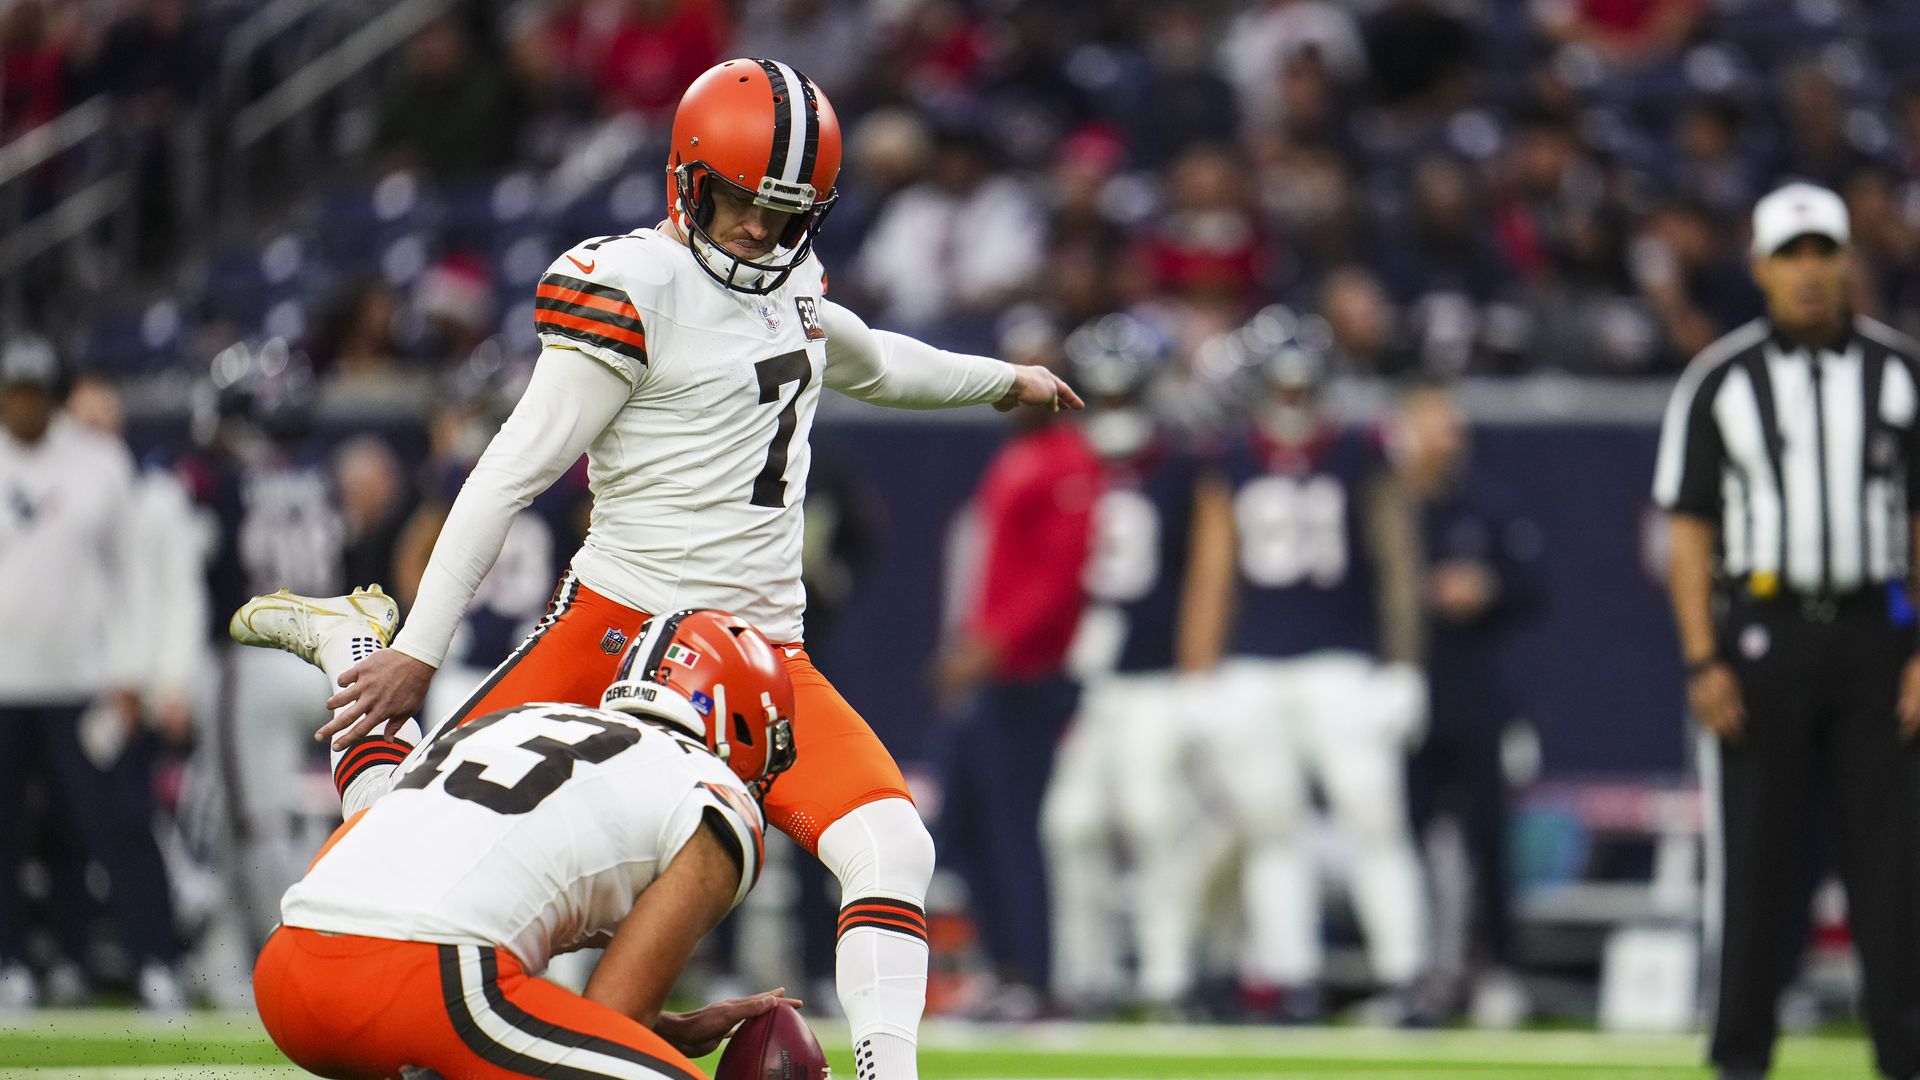 browns roster includes 5 special teams only players including 3 kickers